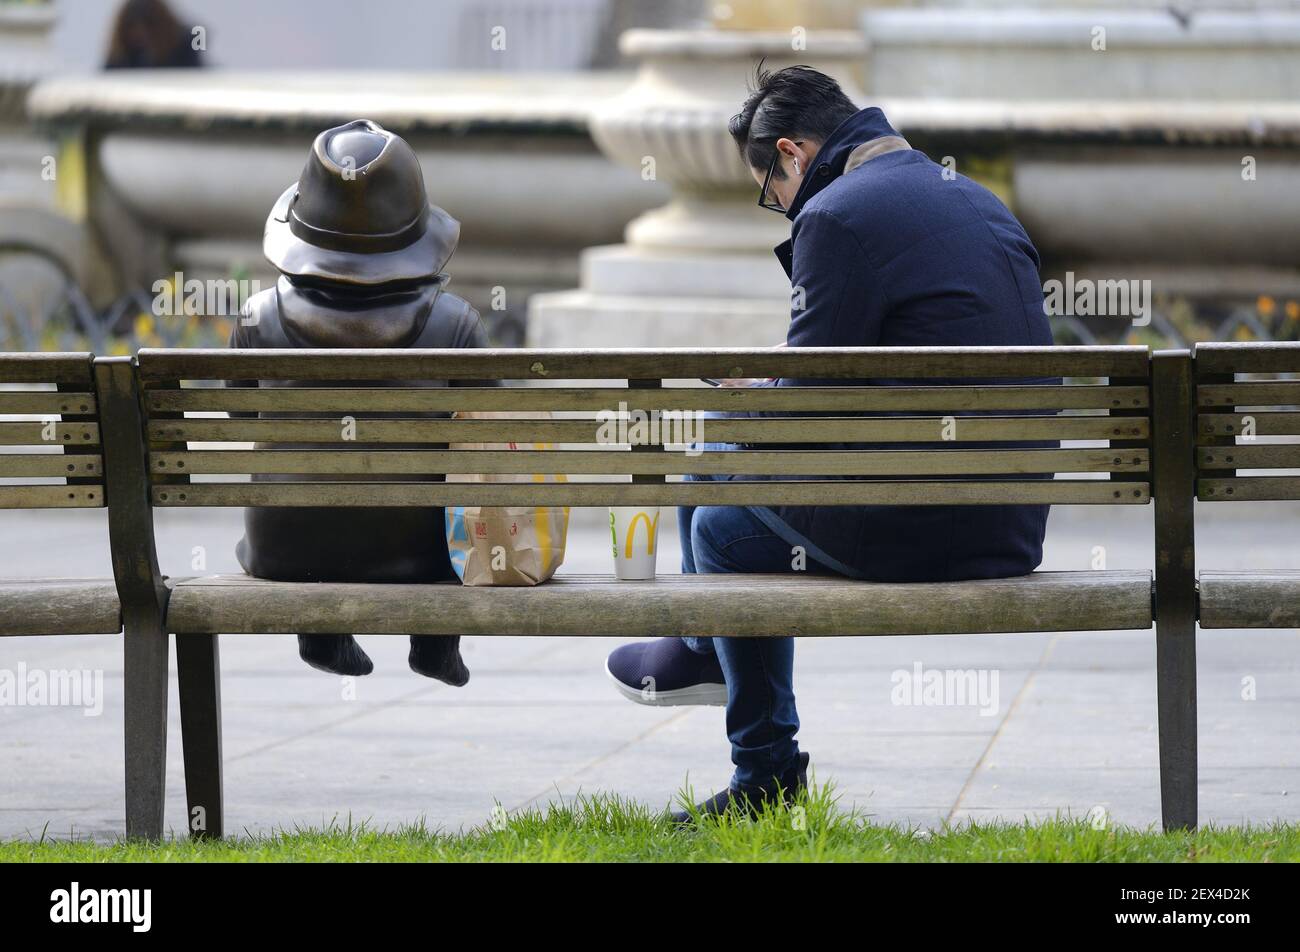 London, England, UK. Sharing a takeaway lunch with Paddington Bear in Leicester Square during the COVID restrictions, March 2021 Stock Photo